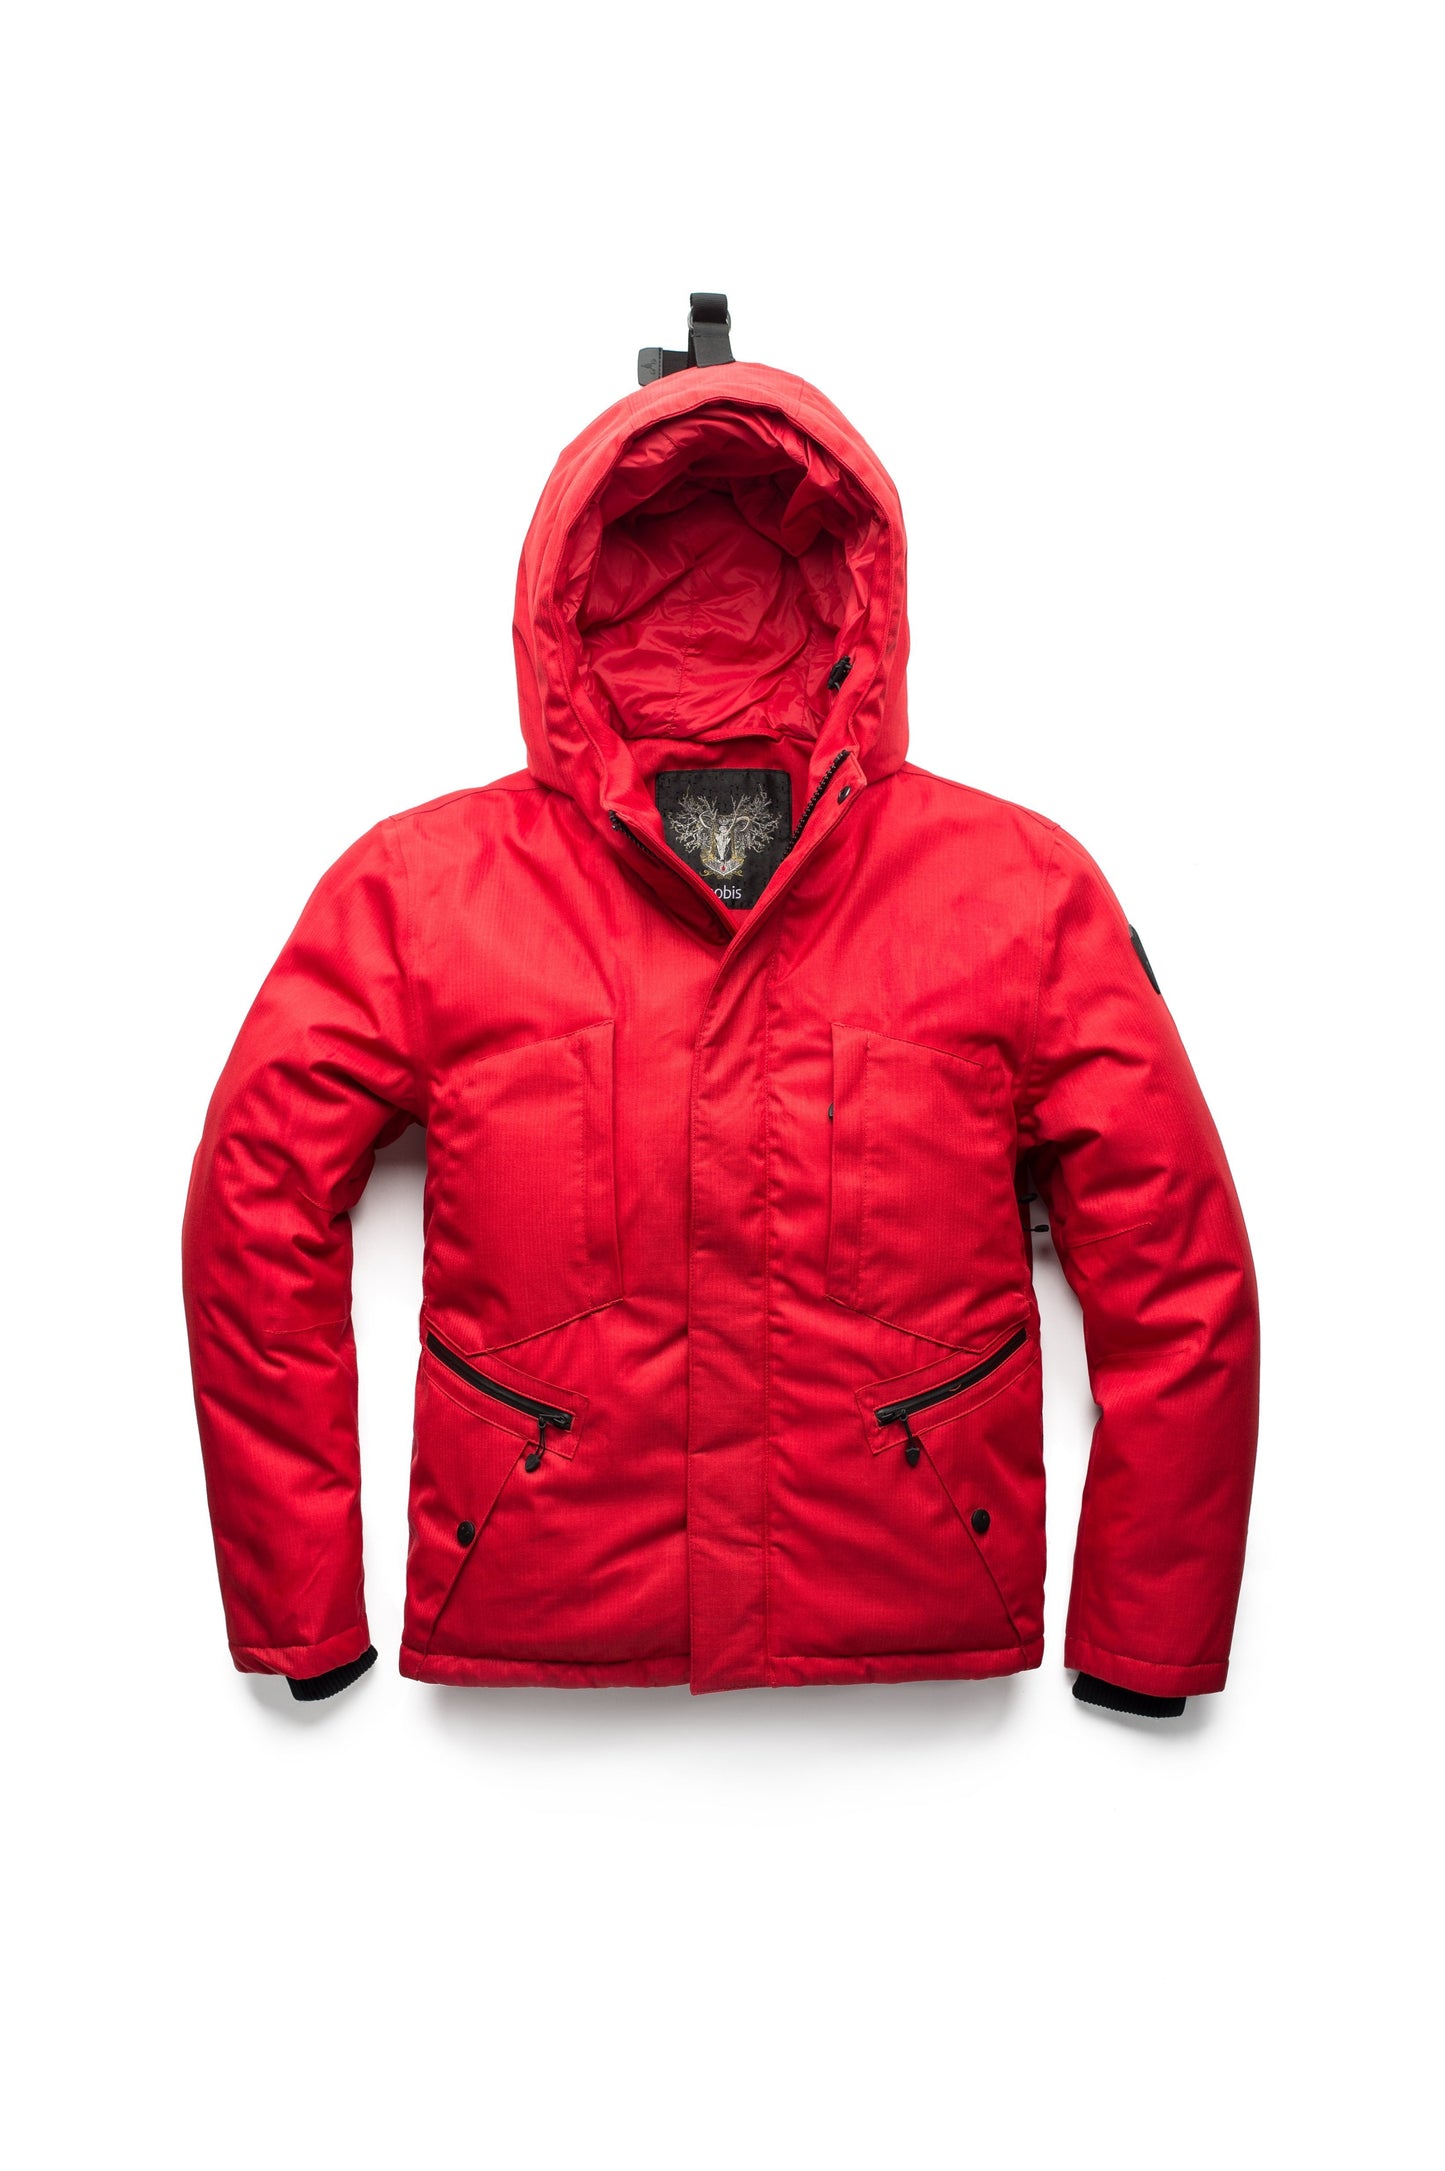 Men's waist length light down coat equipped with six exterior pockets and a hood in Red